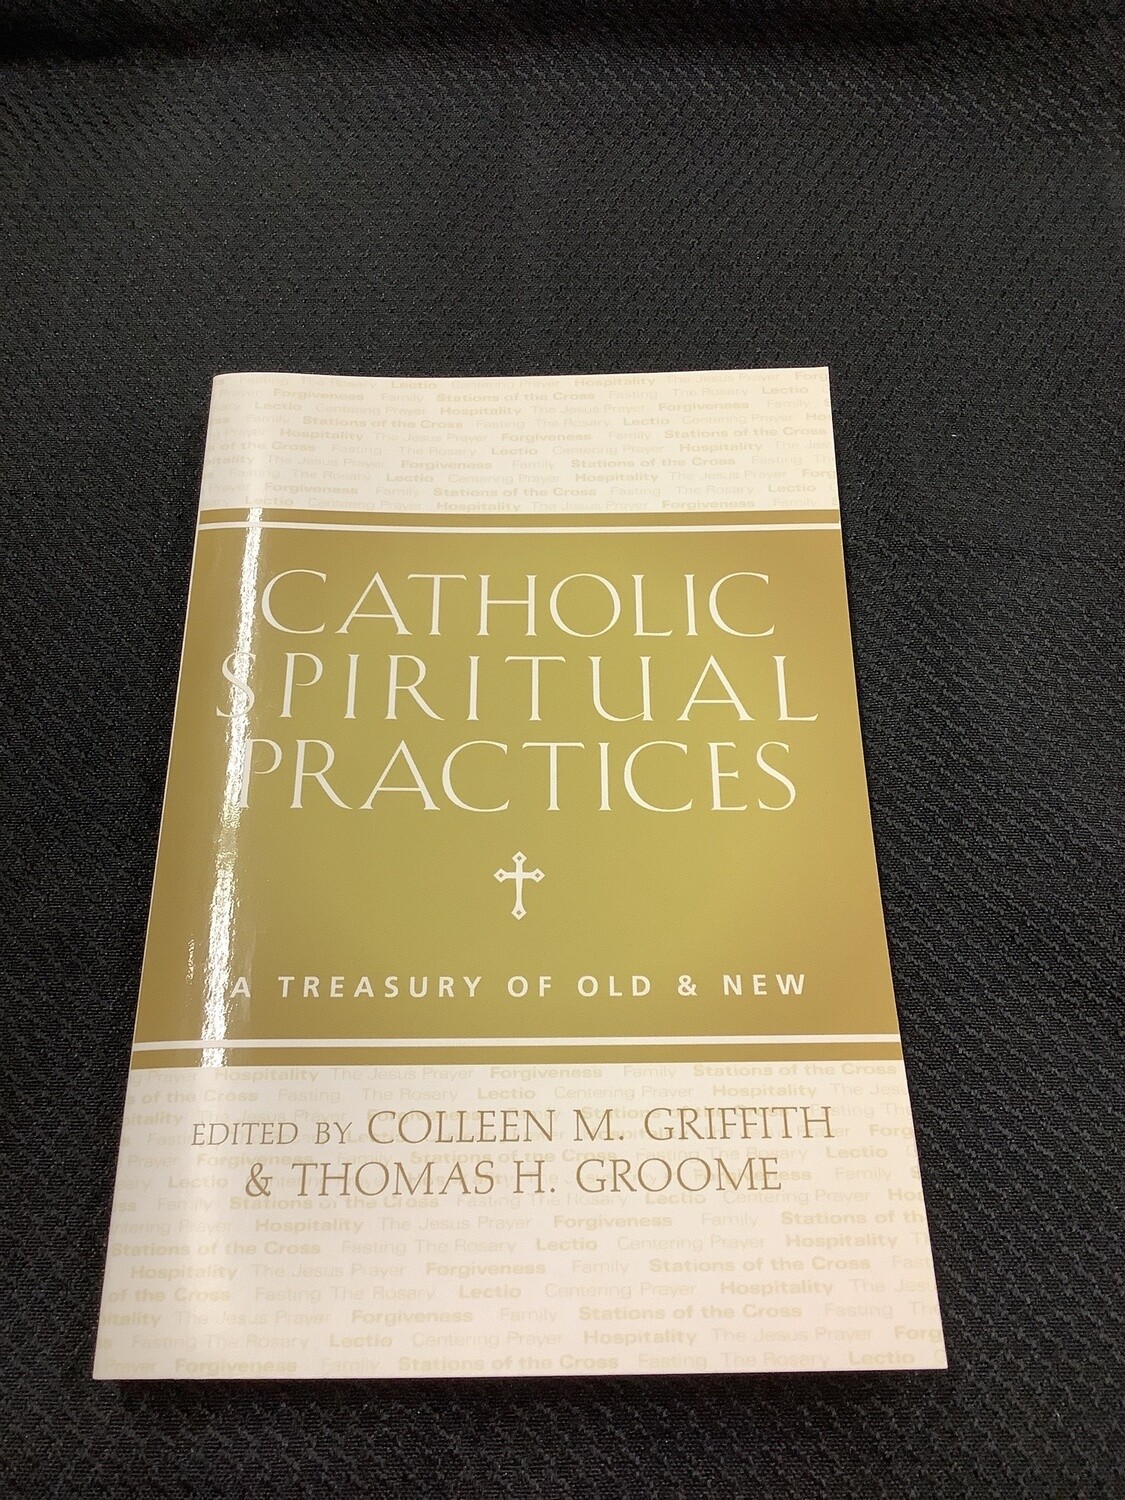 Catholic Spiritual Practices A Treasury of Old &amp; New - Colleen M. Griffith, Thomas H. Groome